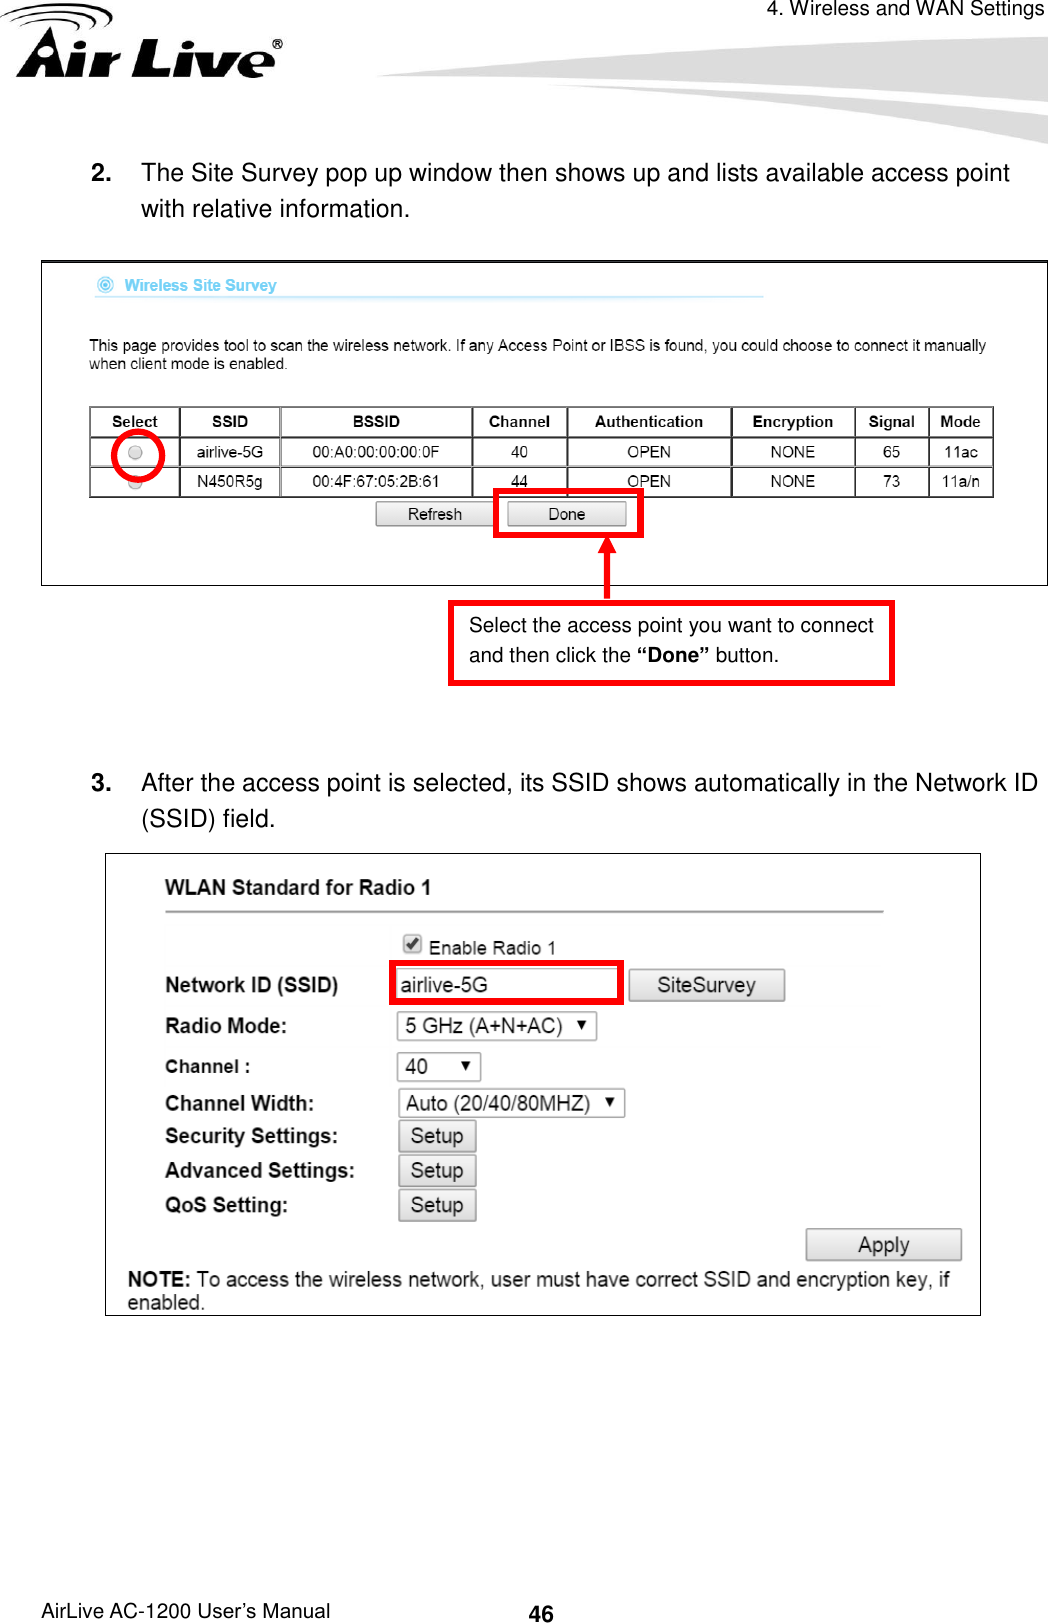 4. Wireless and WAN Settings AirLive AC-1200 User’s Manual 46 2. The Site Survey pop up window then shows up and lists available access point with relative information.     3. After the access point is selected, its SSID shows automatically in the Network ID (SSID) field.     Select the access point you want to connect and then click the “Done” button. 